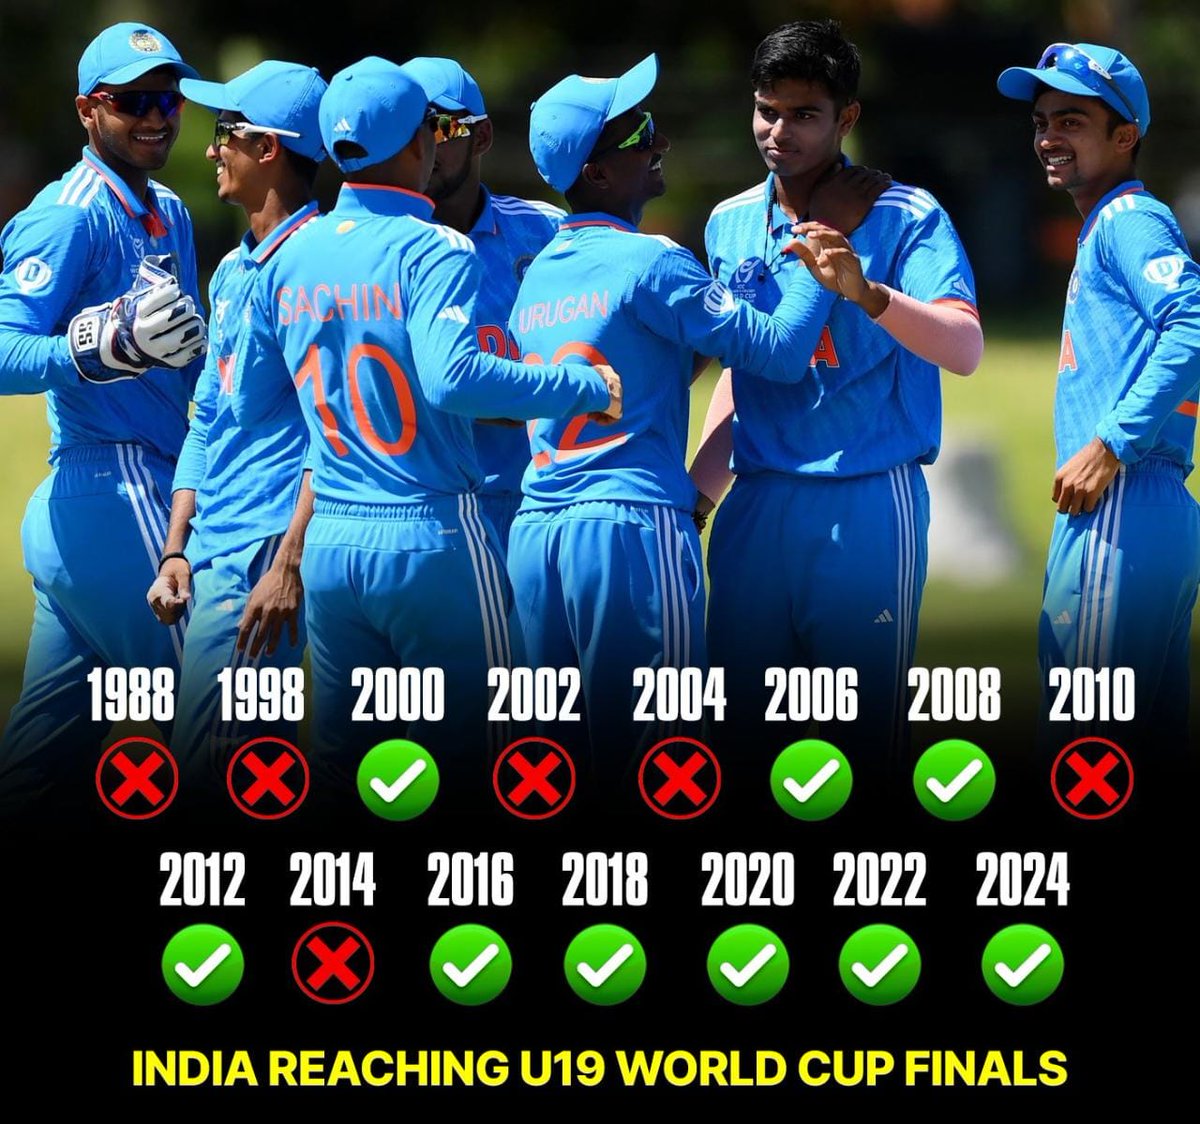 If you felt very disappointed after Indian cricket team loosing in world cup finals.. Then there is one more team keeping our hopes high by reaching finals in under 19 cricket world cup.. The most dominating team in the history of the tournament.. Kudos 🇮🇳🇮🇳👏.. All the best 👍